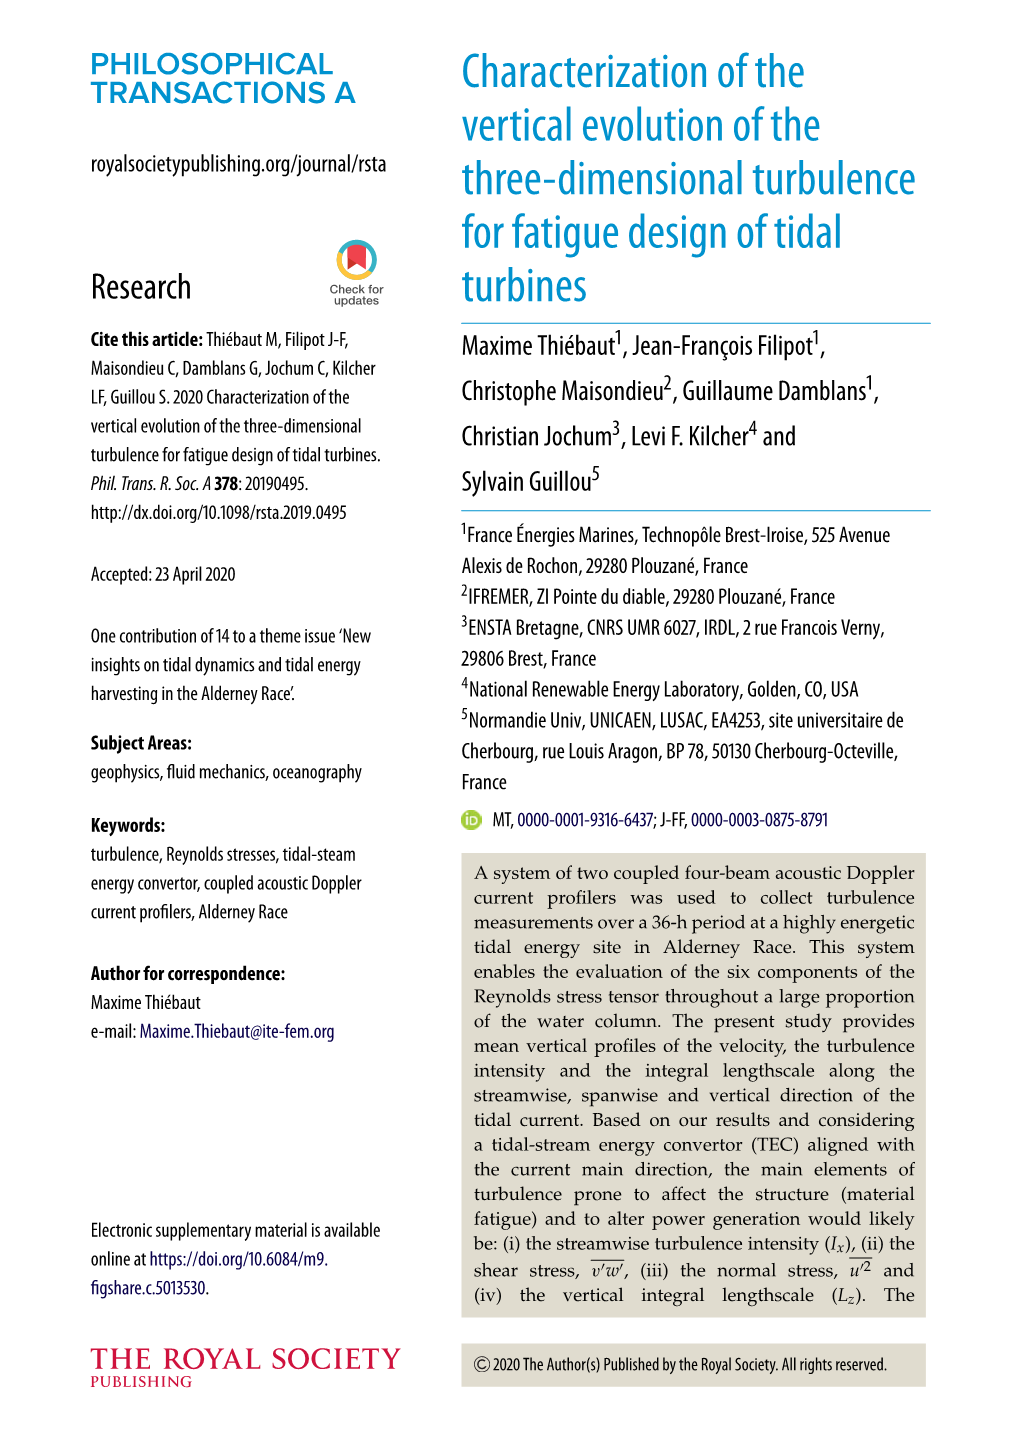 Characterization of the Vertical Evolution of the Three-Dimensional Turbulence for Fatigue Design of Tidal Turbines